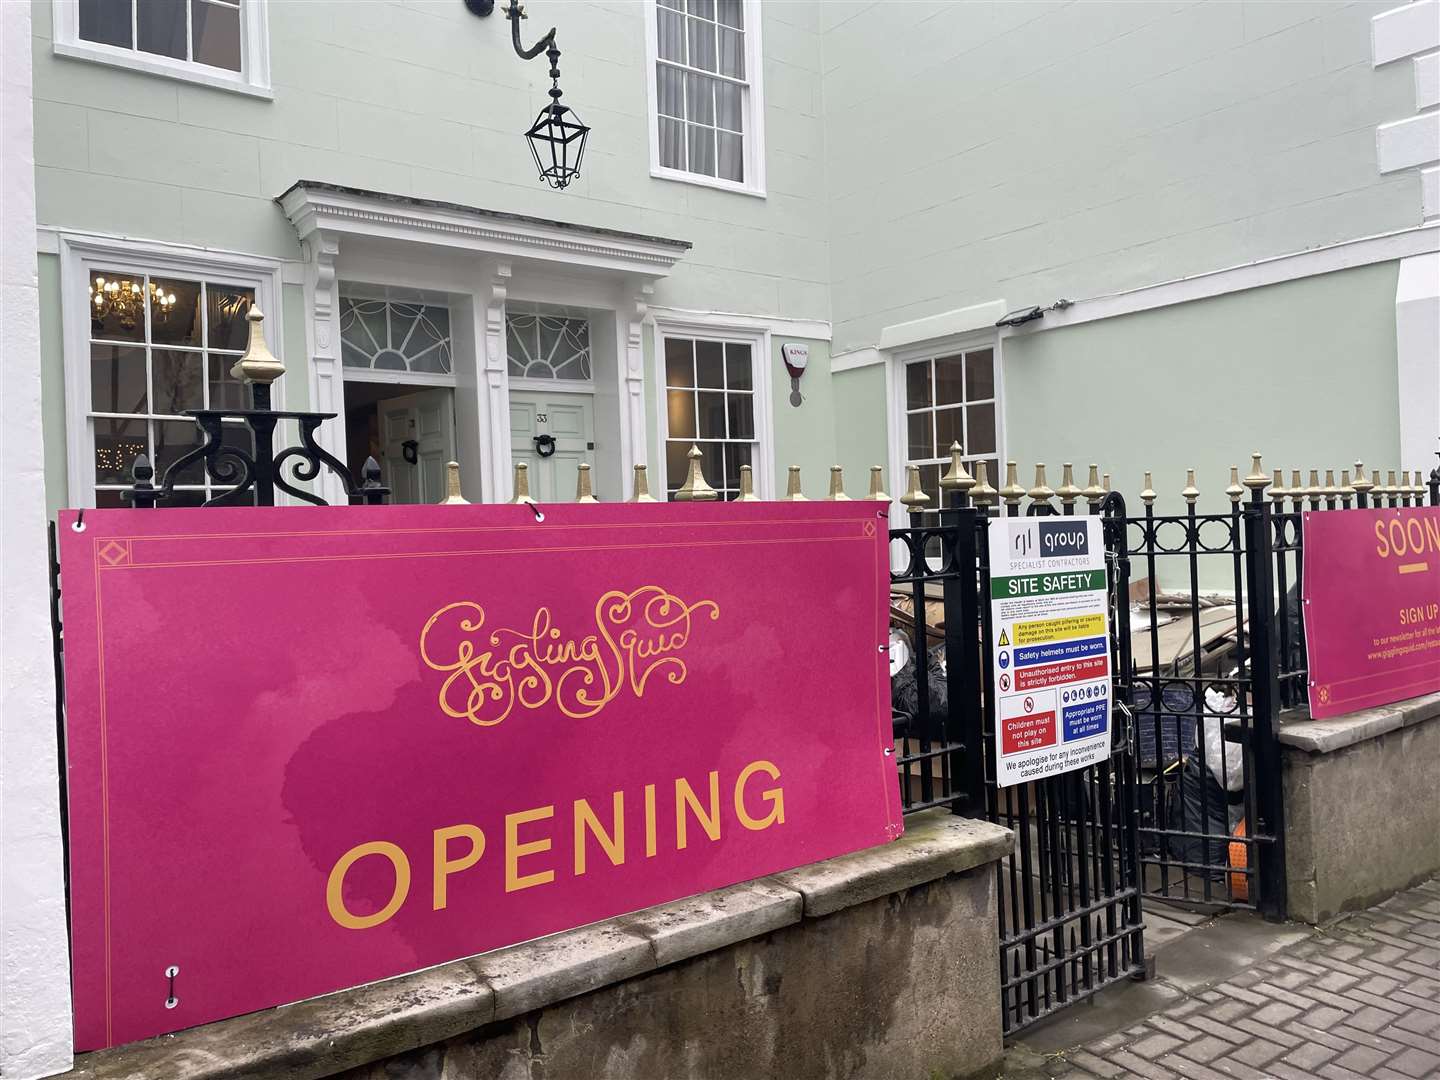 The Giggling Squid thai restaurant has opened in Earl Street, Maidstone